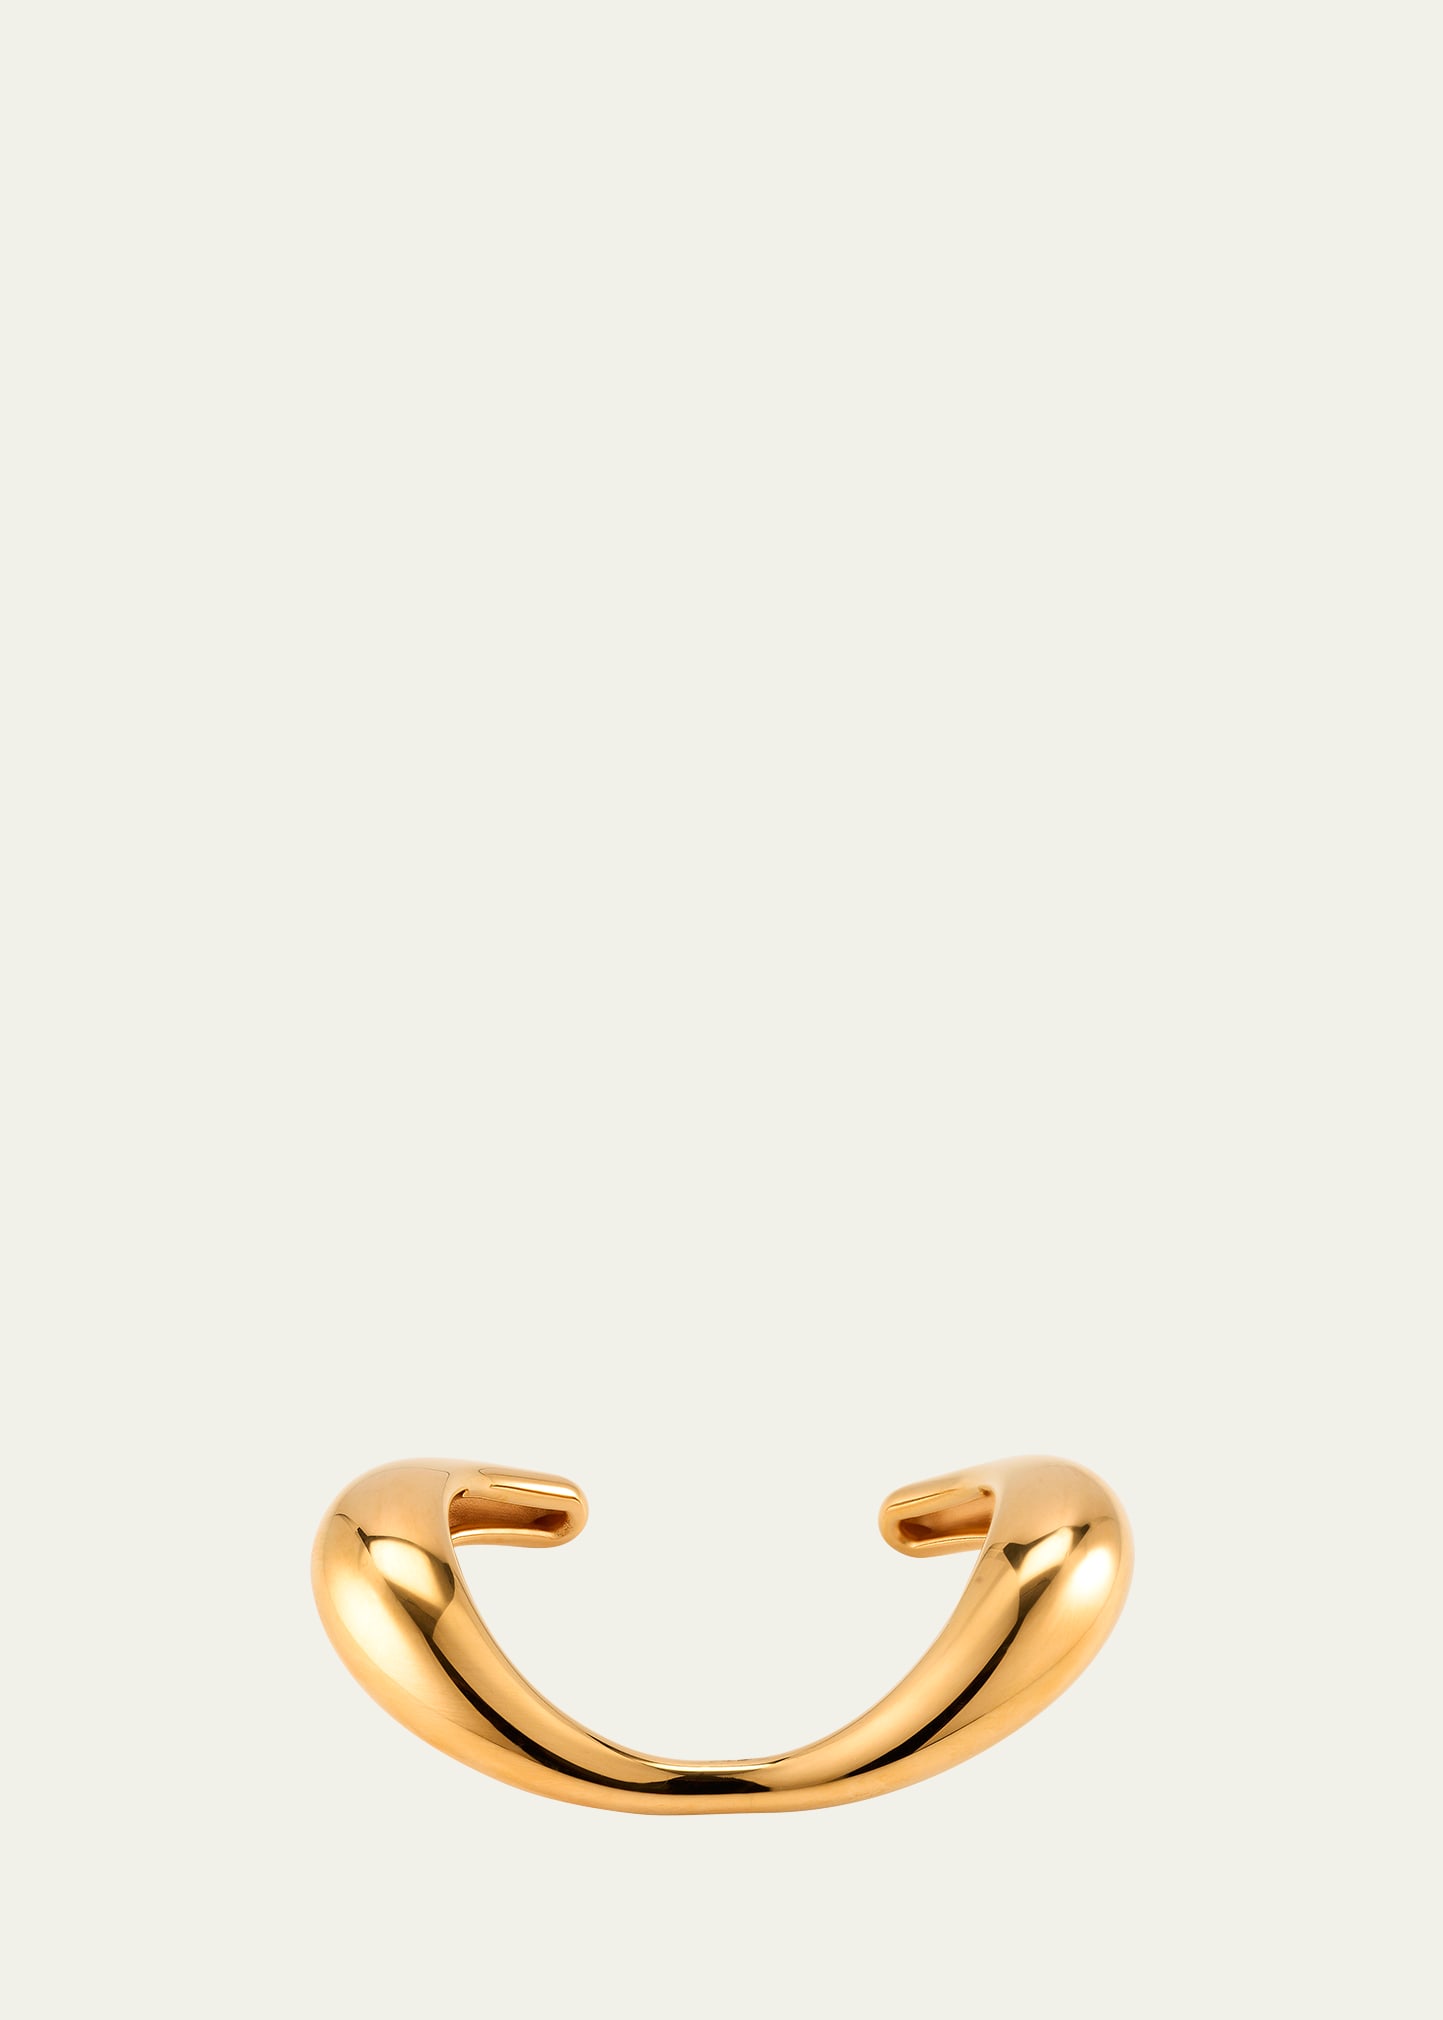 CHARLOTTE CHESNAIS LIPS CURVED CUFF BRACELET IN GOLD VERMEIL